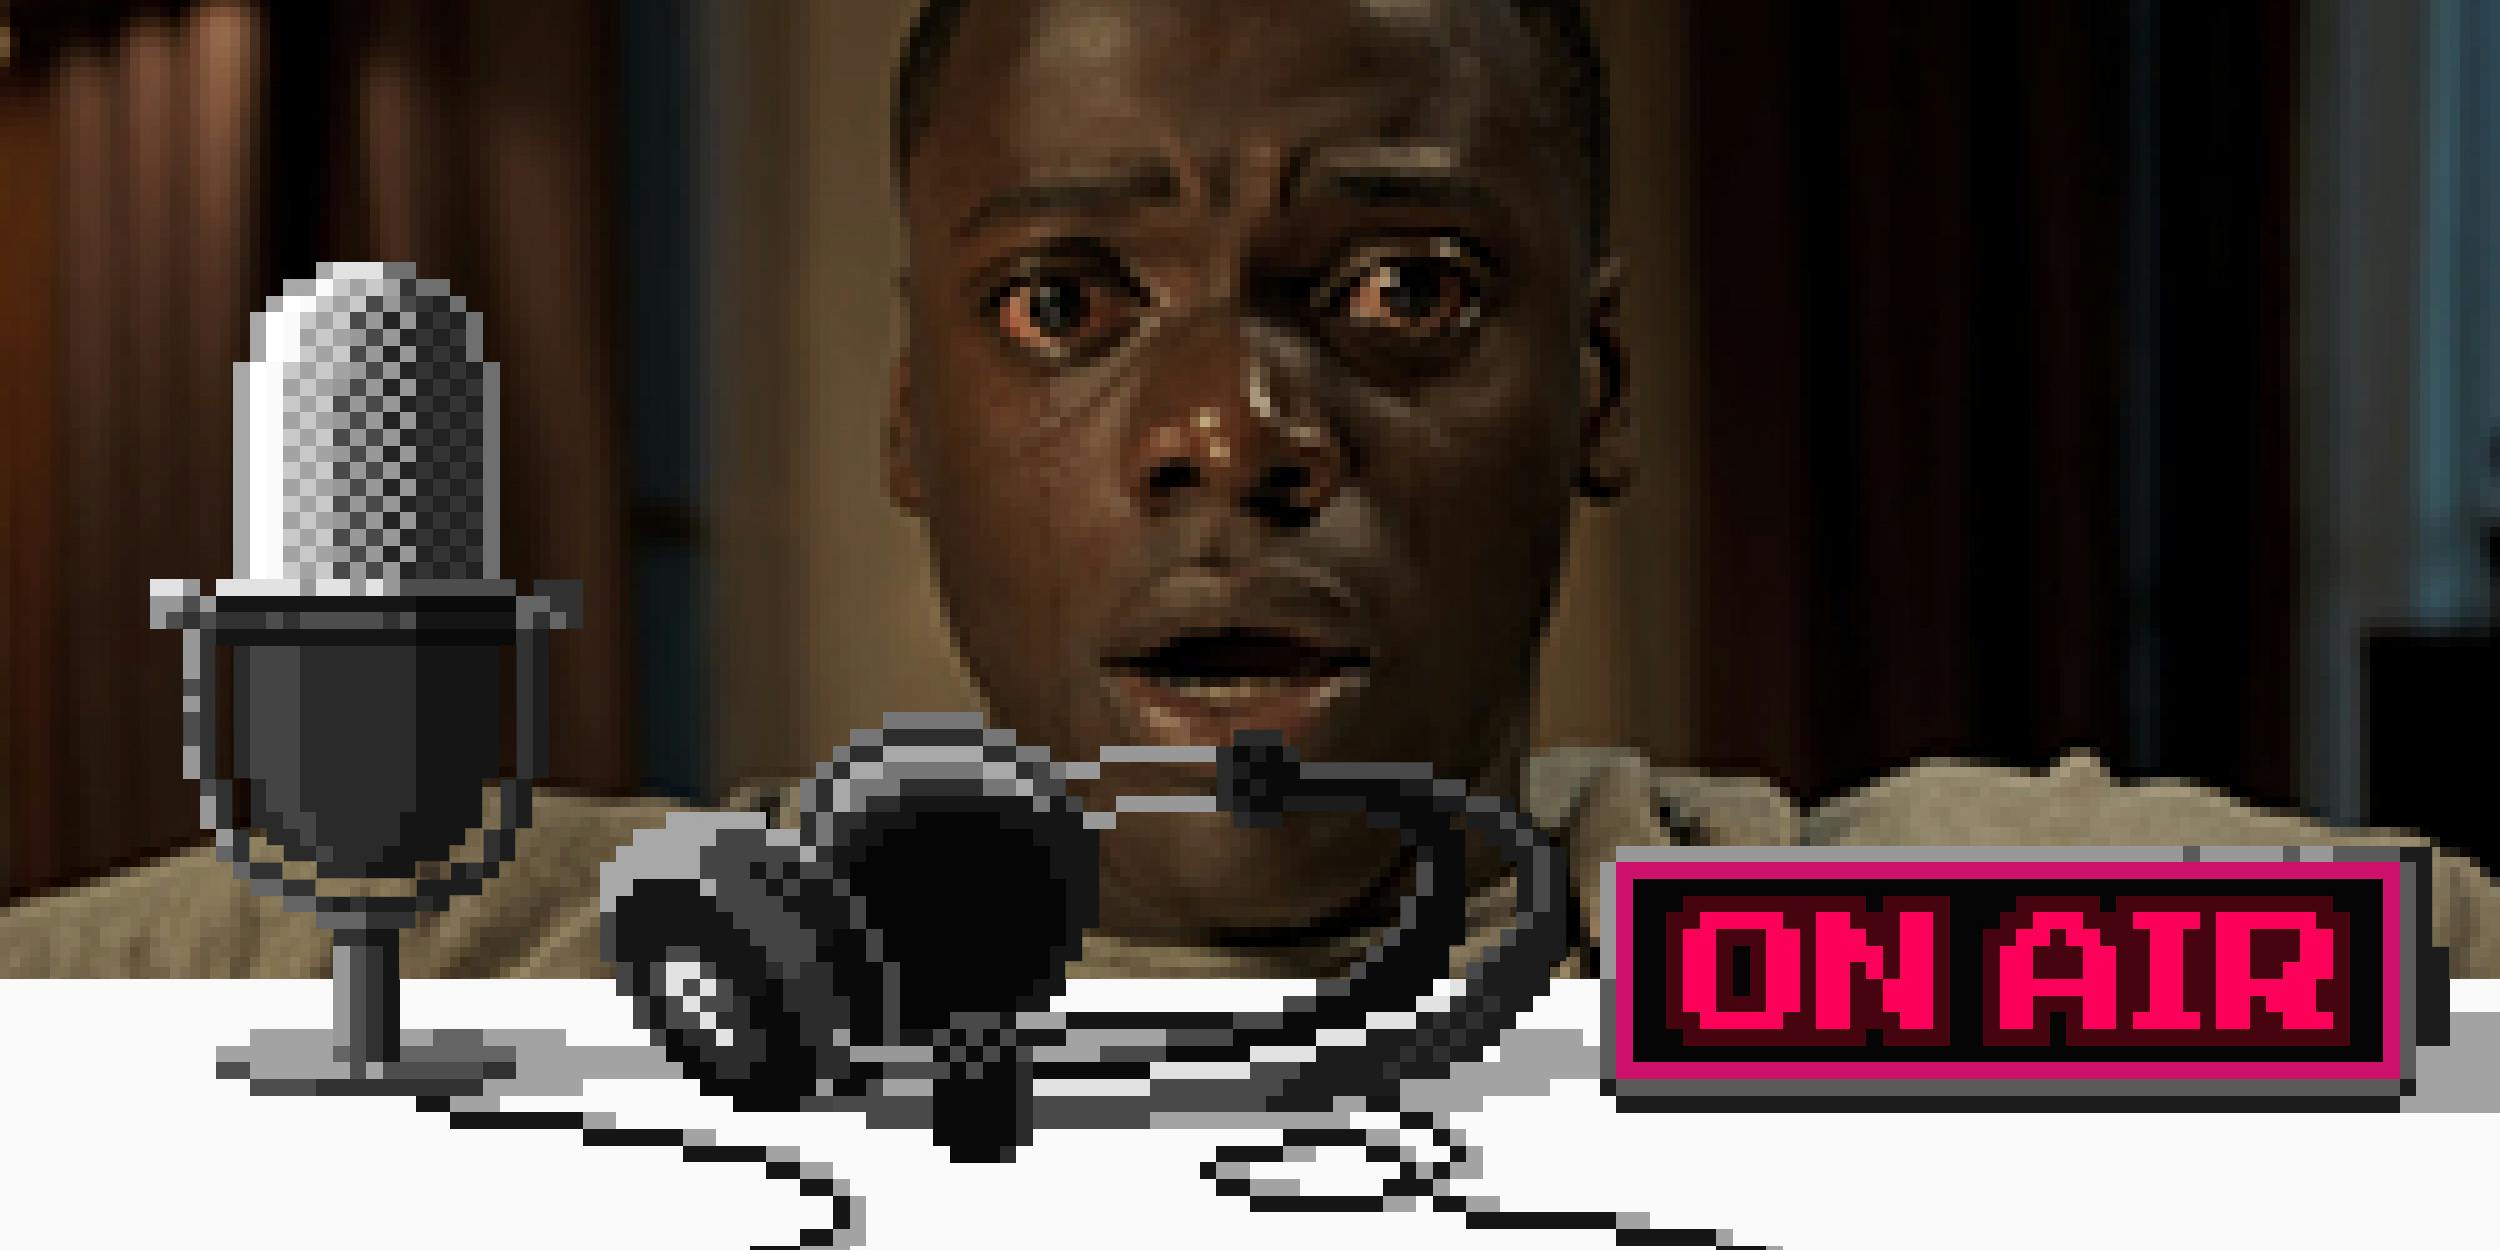 Upstream podcast discusses "Get Out" movie